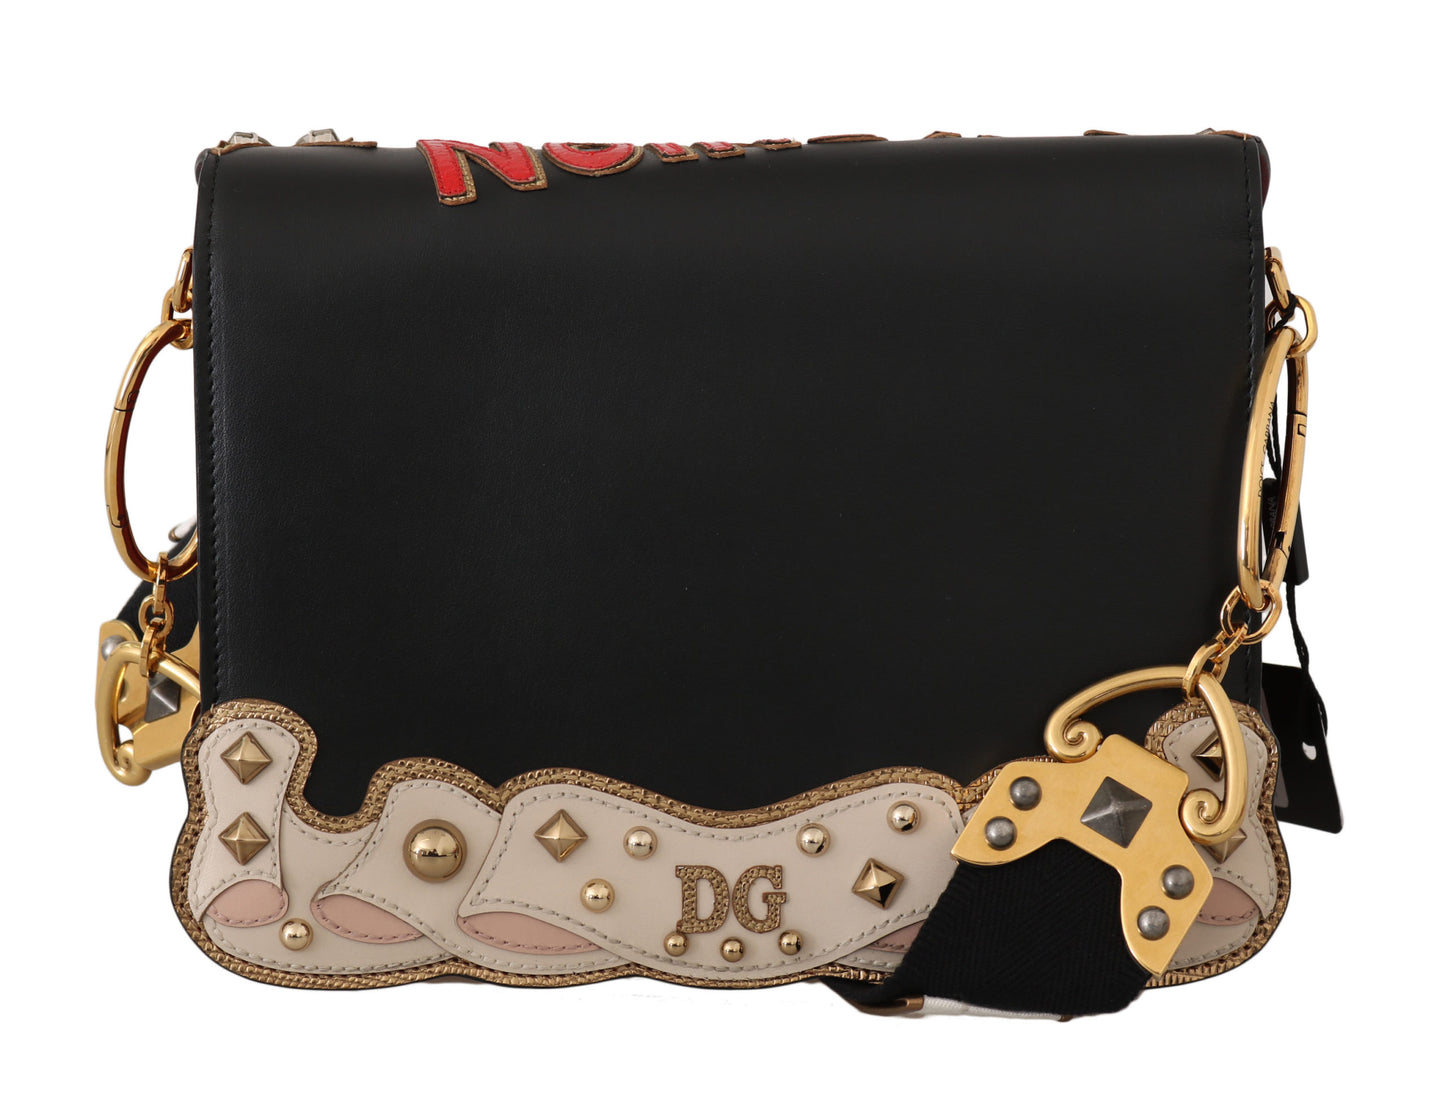 Chic Leather Lucia Shoulder Bag with Crystal Embellishments